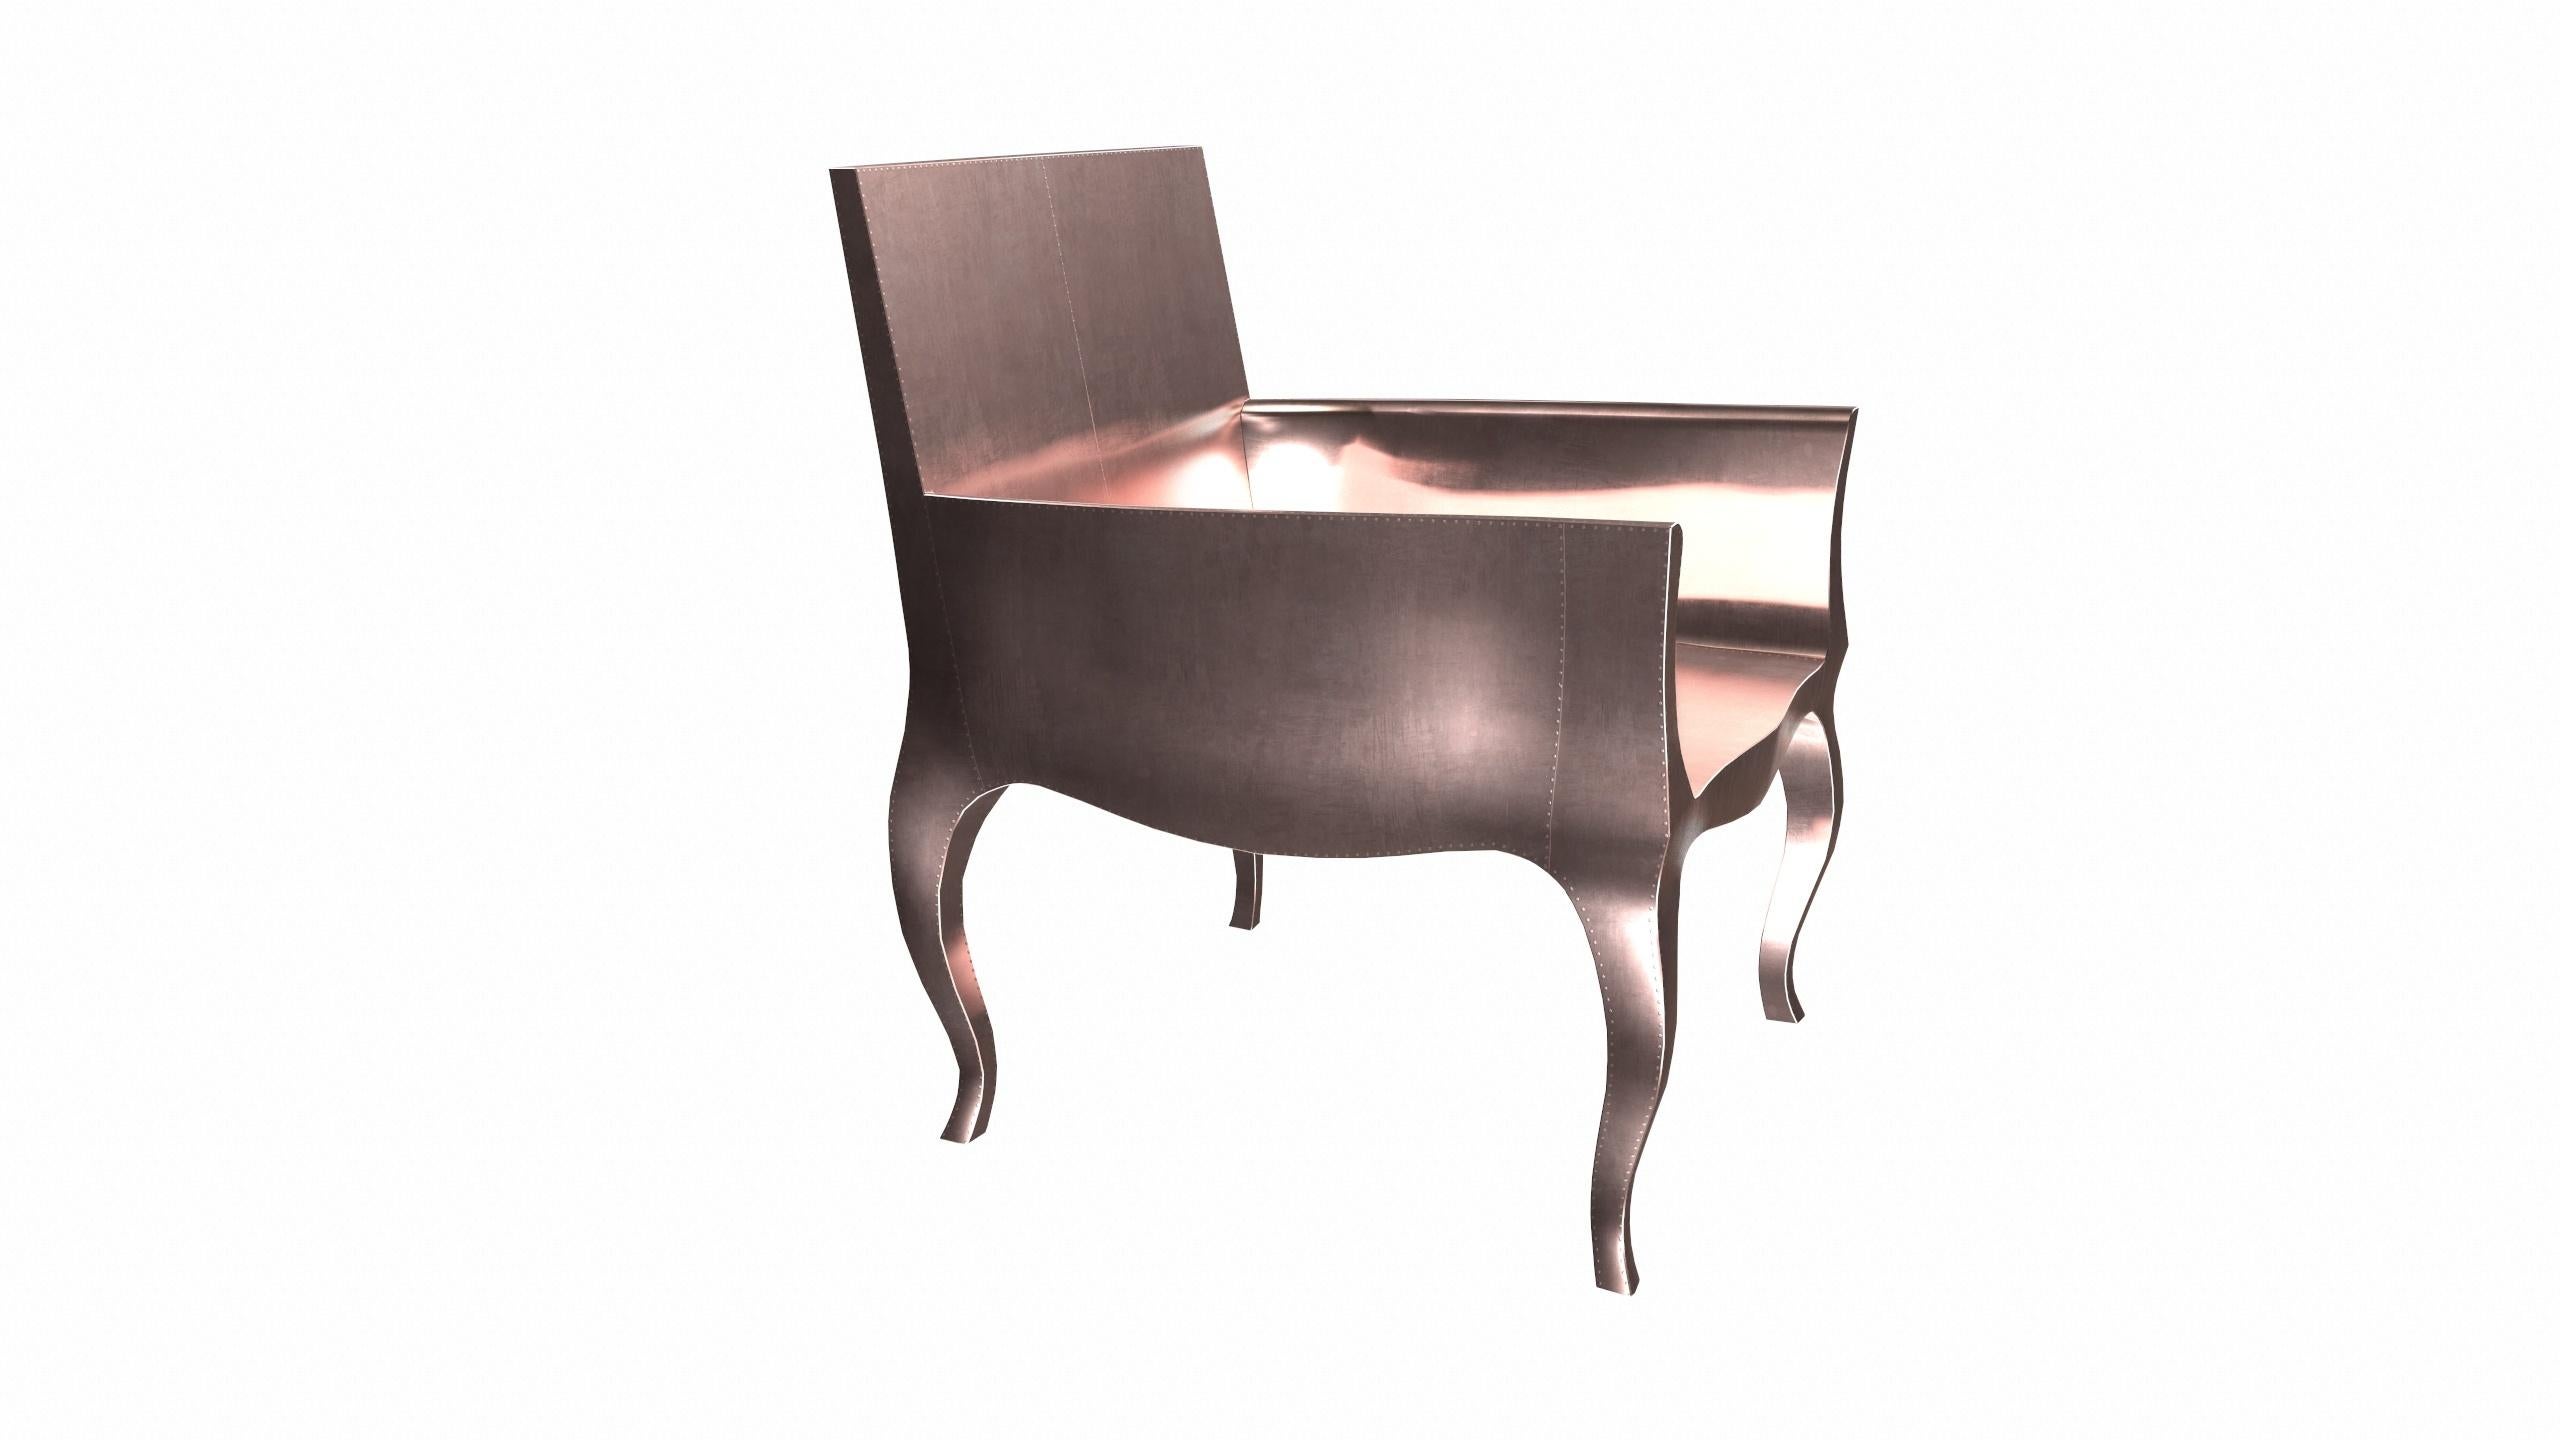 Hand-Carved Art Deco Style Chairs in Smooth Copper by Paul Mathieu for S. Odegard For Sale